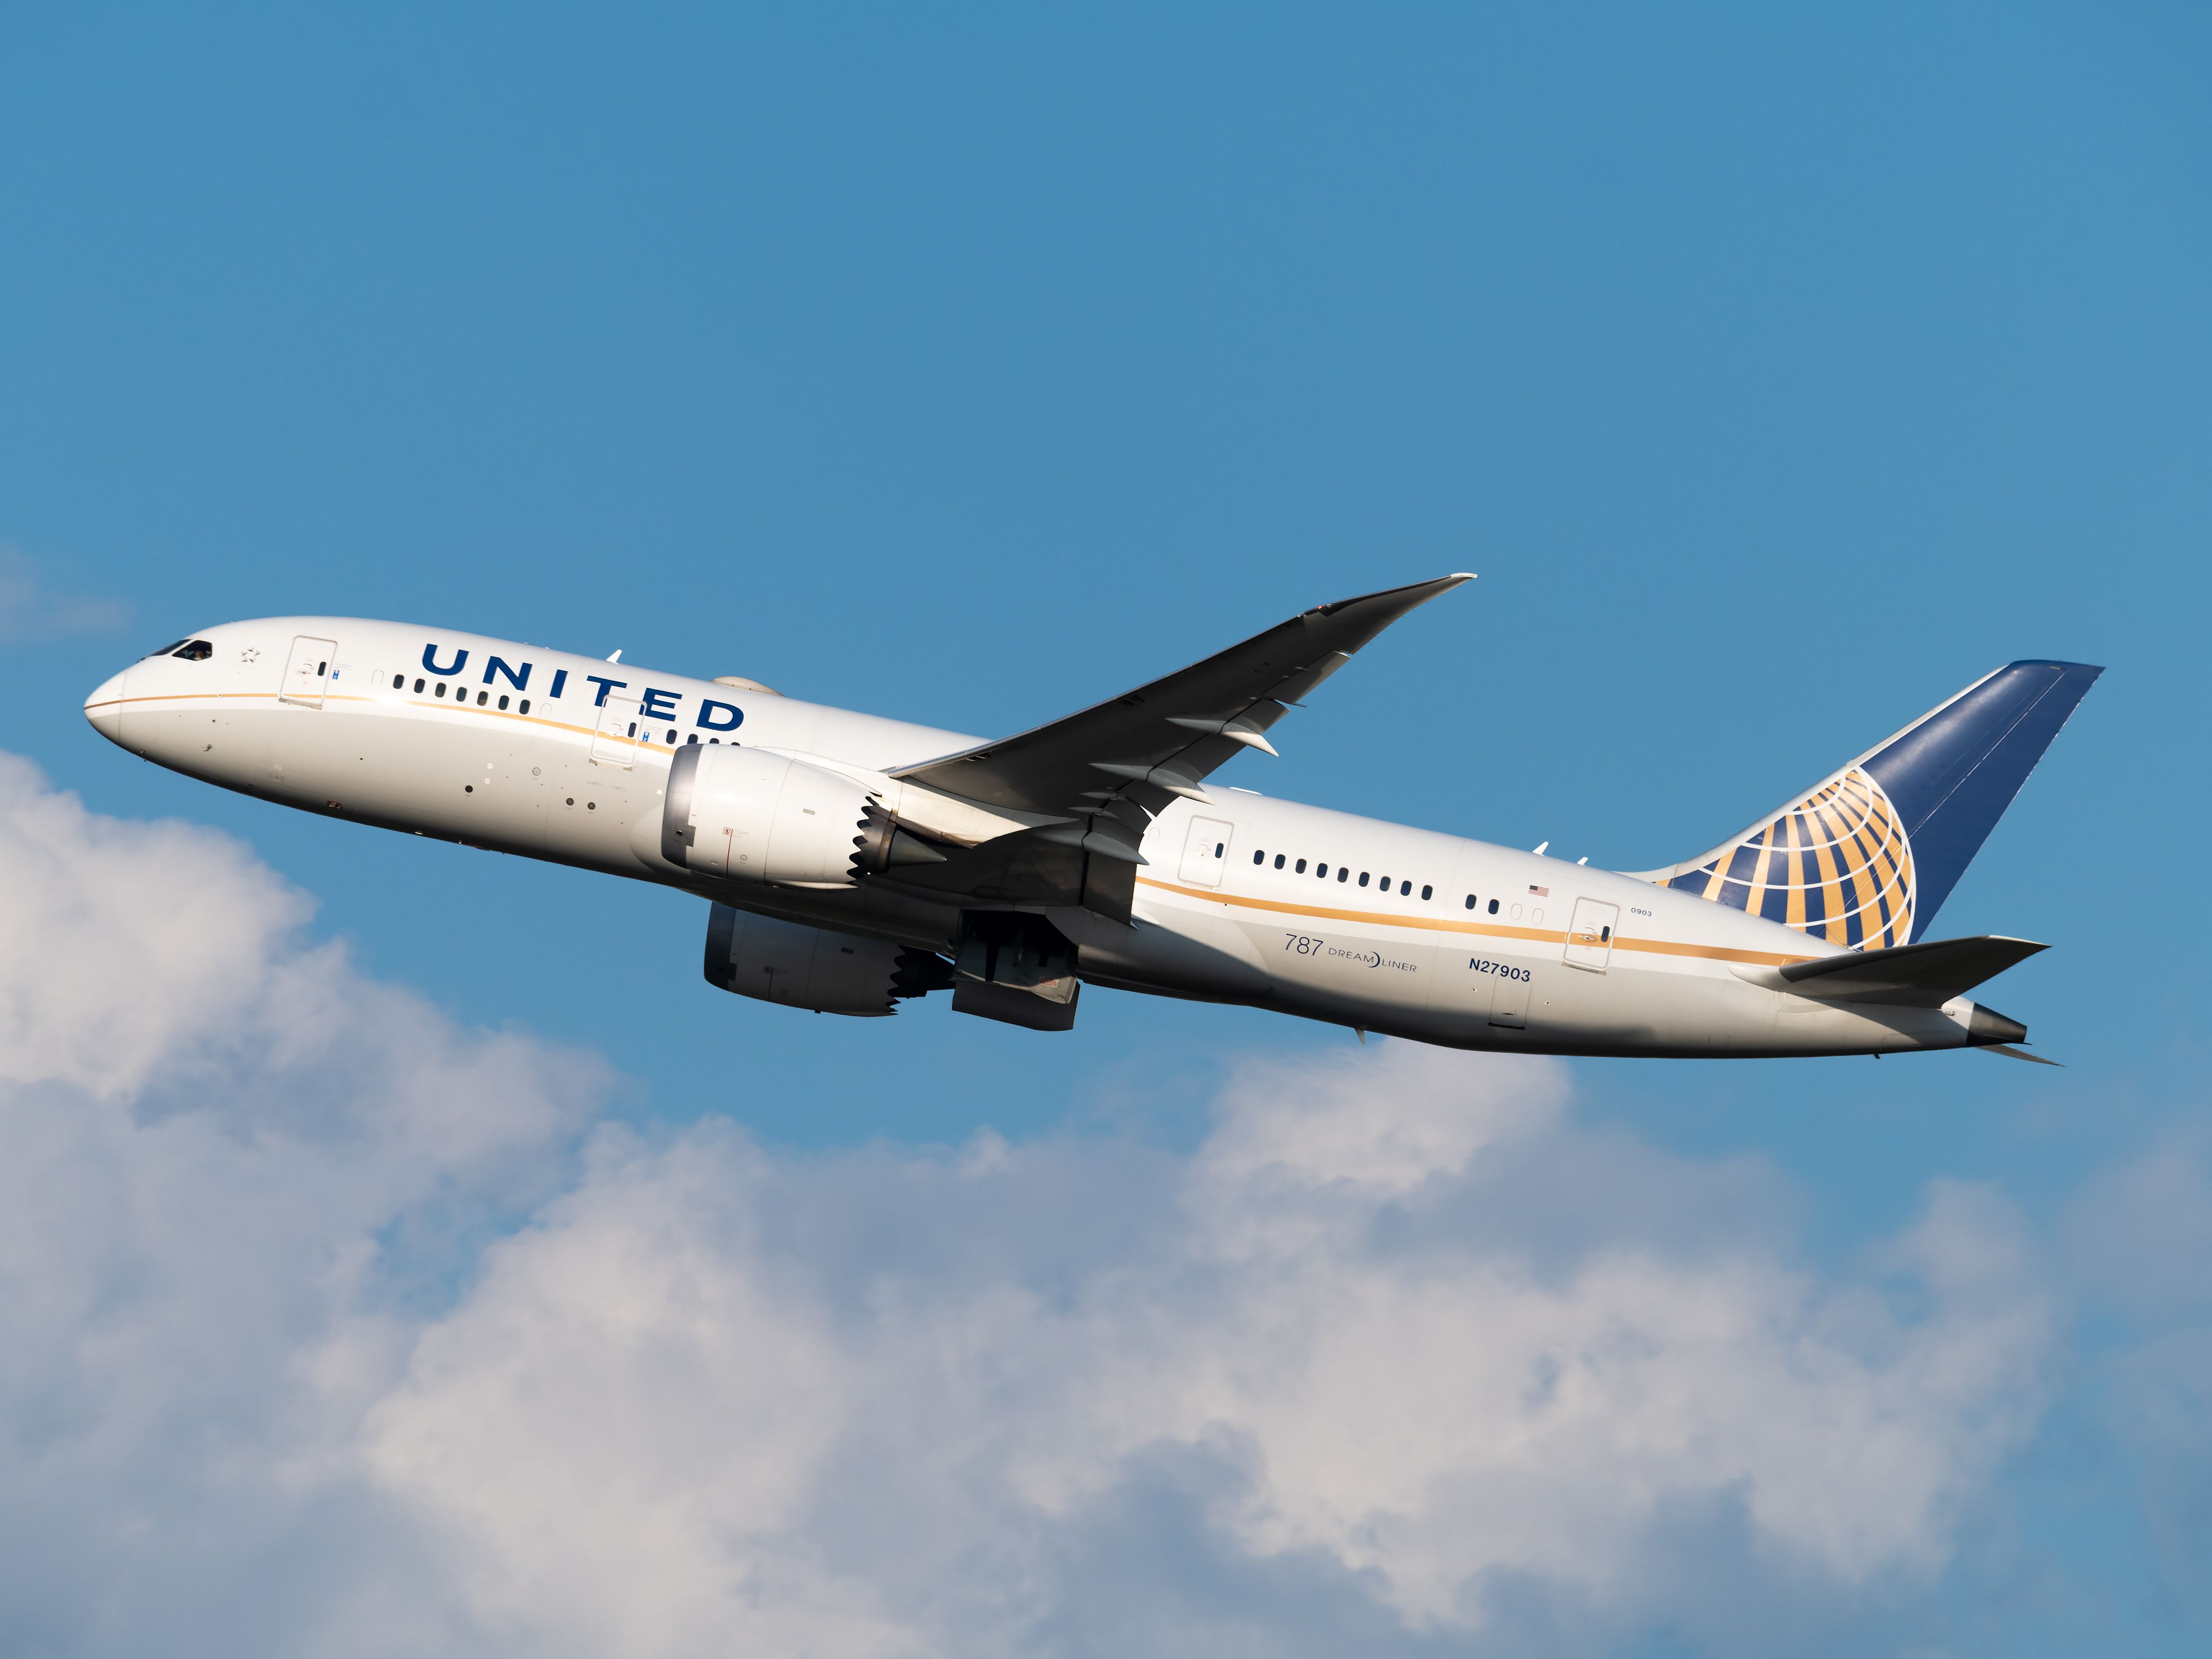 United Airlines Boeing 787 taking off.